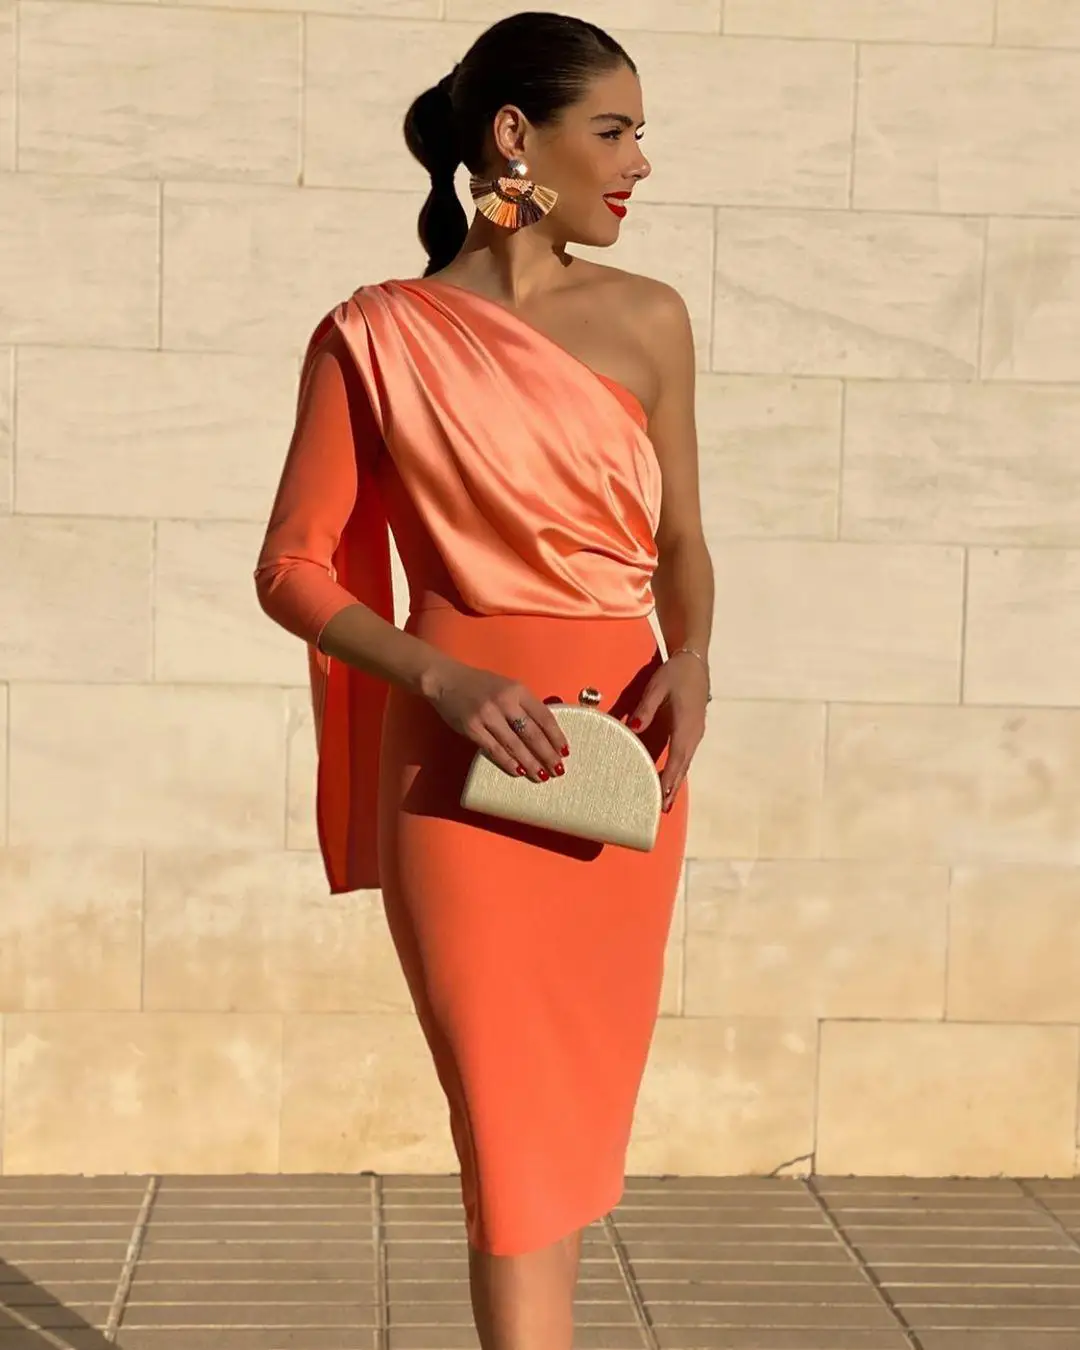 2020 New Long Sleeve Short Cocktail Party Dress With Cape One Shoulder Women Sexy Orange Prom Gown robes de soirée فساتين السهرة